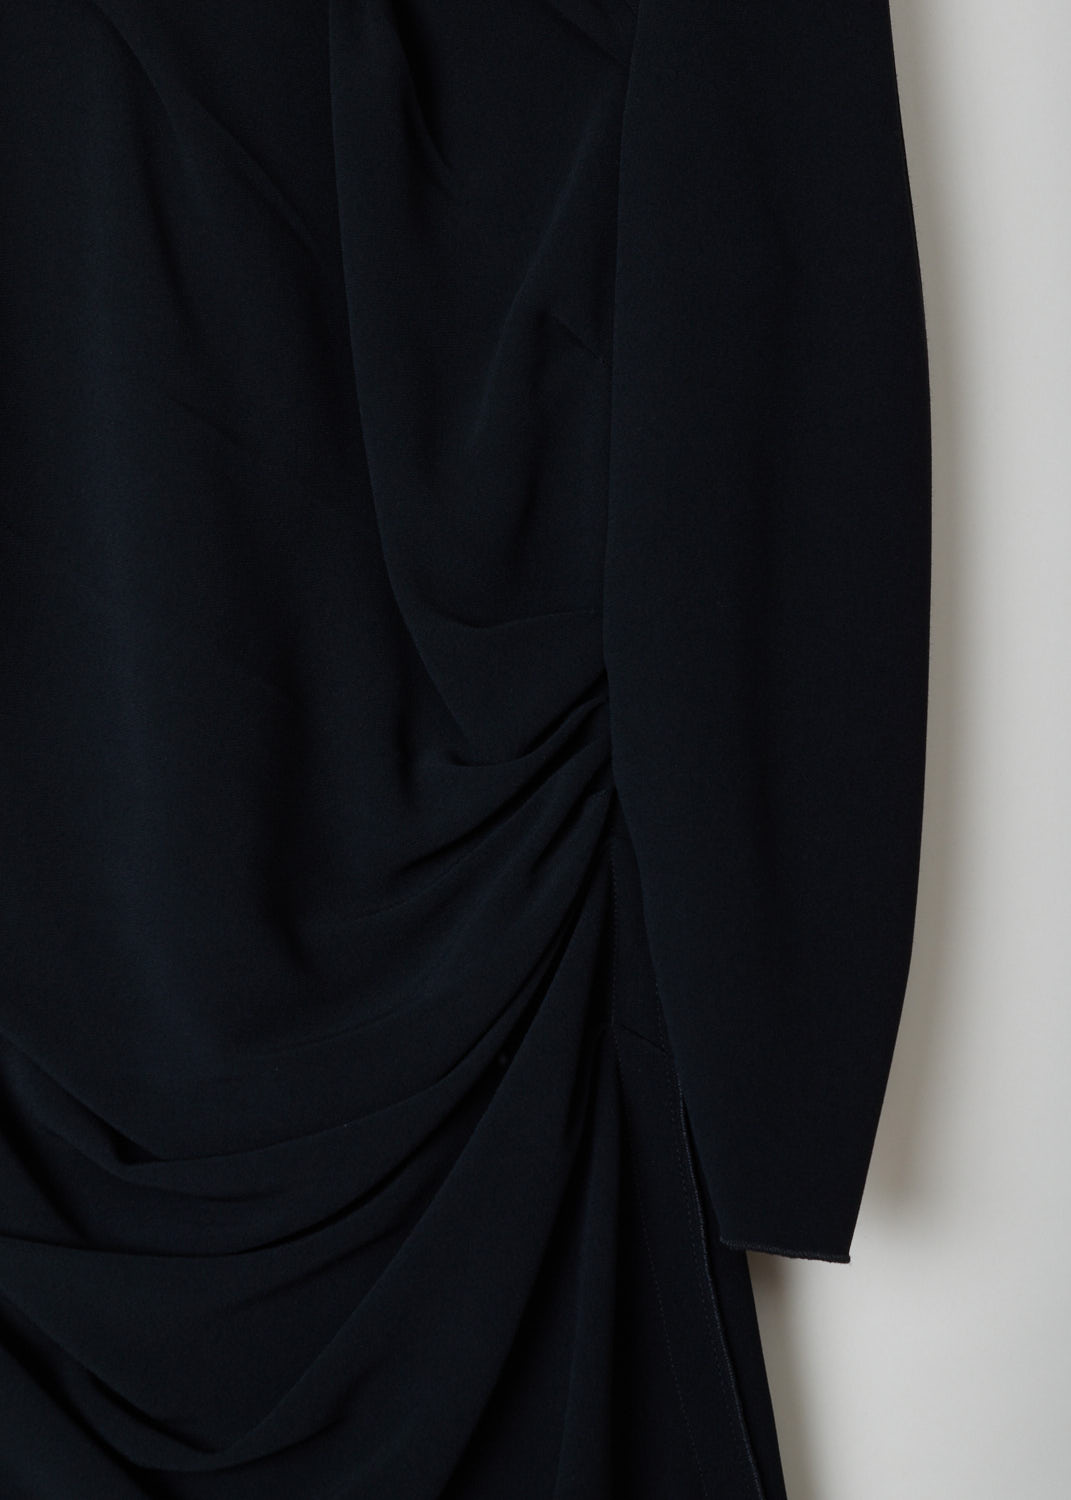 Dolce & Gabbana, Black mid-length dress with draped features, F6BQ0T_FSADD_X0873, black, detail2, Black draped dress featuring a round neckline, 3/4 sleeve length with a midi dress length. Pleats staring on the shoulder flow down the dress, with similar pleats starting on waist height.  